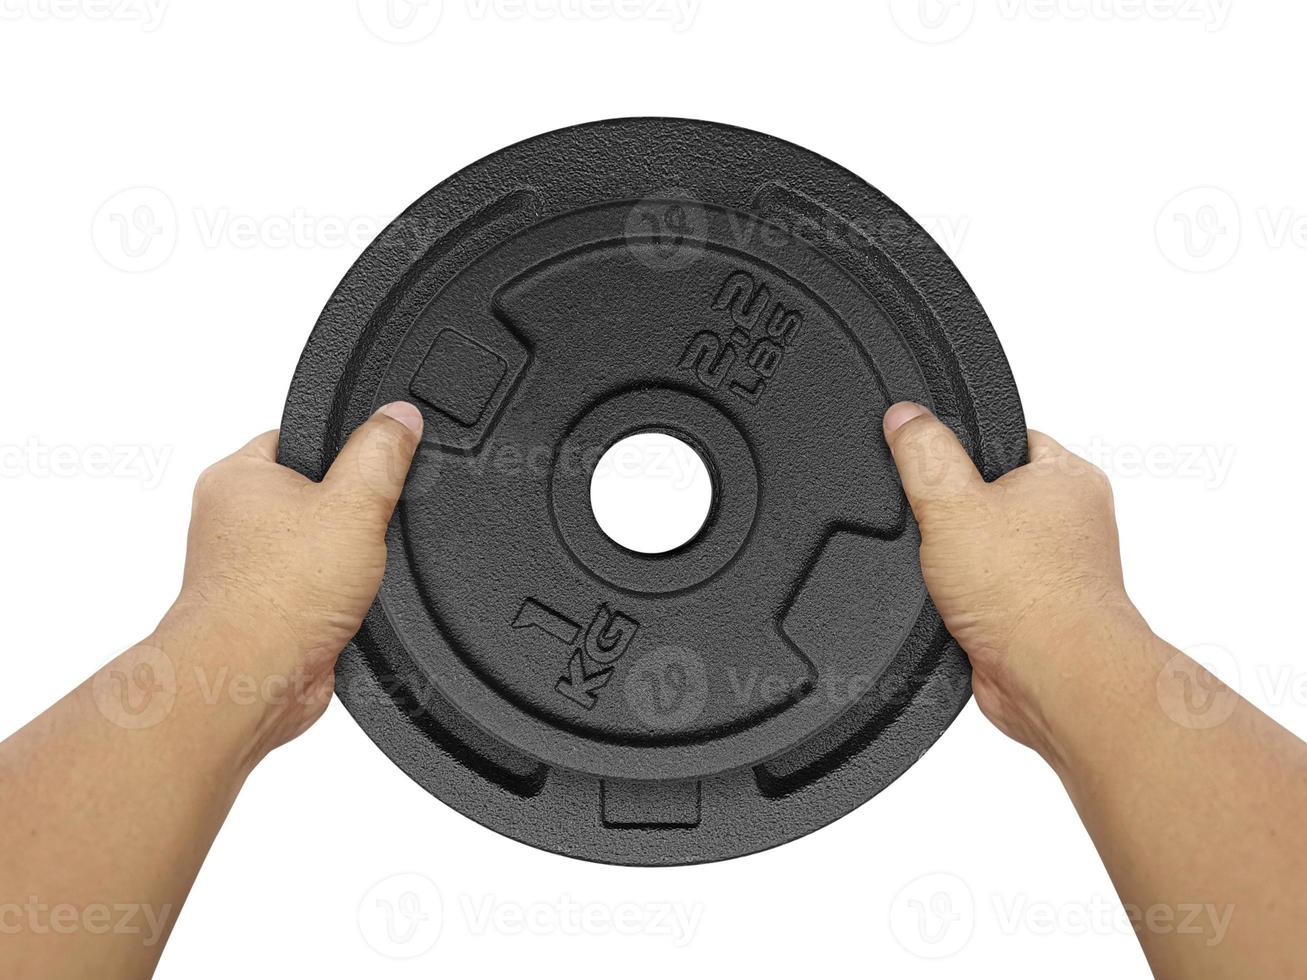 Hands holding Heavy weight plate isolated on white background photo